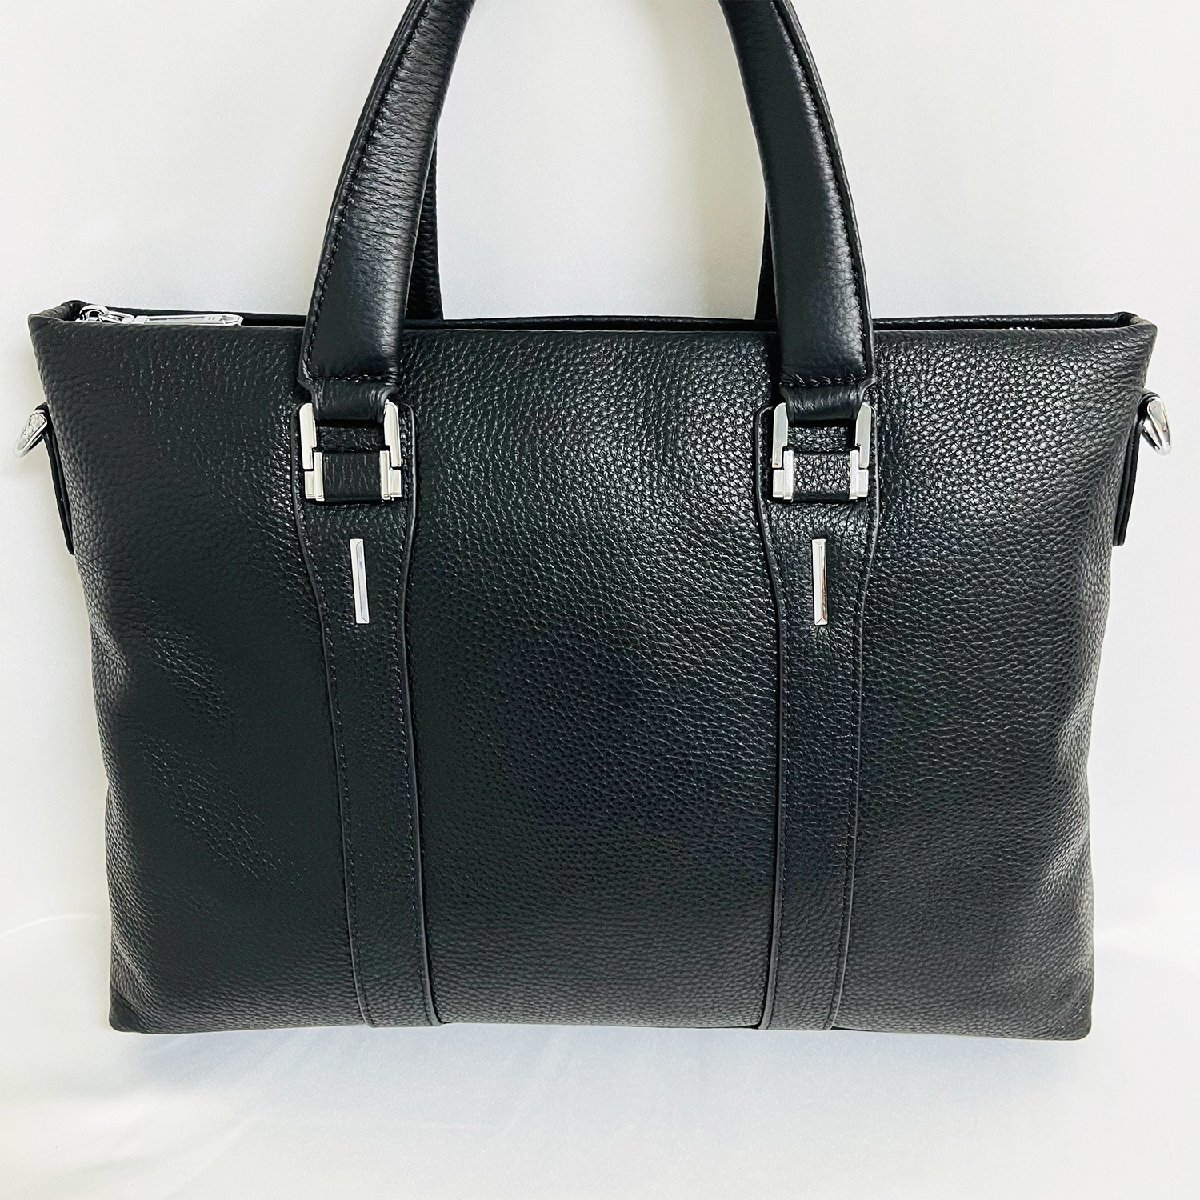  standard business bag regular price 2 ten thousand FRANKLIN MUSK* America * New York departure high quality cow leather leather shoulder briefcase 2way business trip commuting 